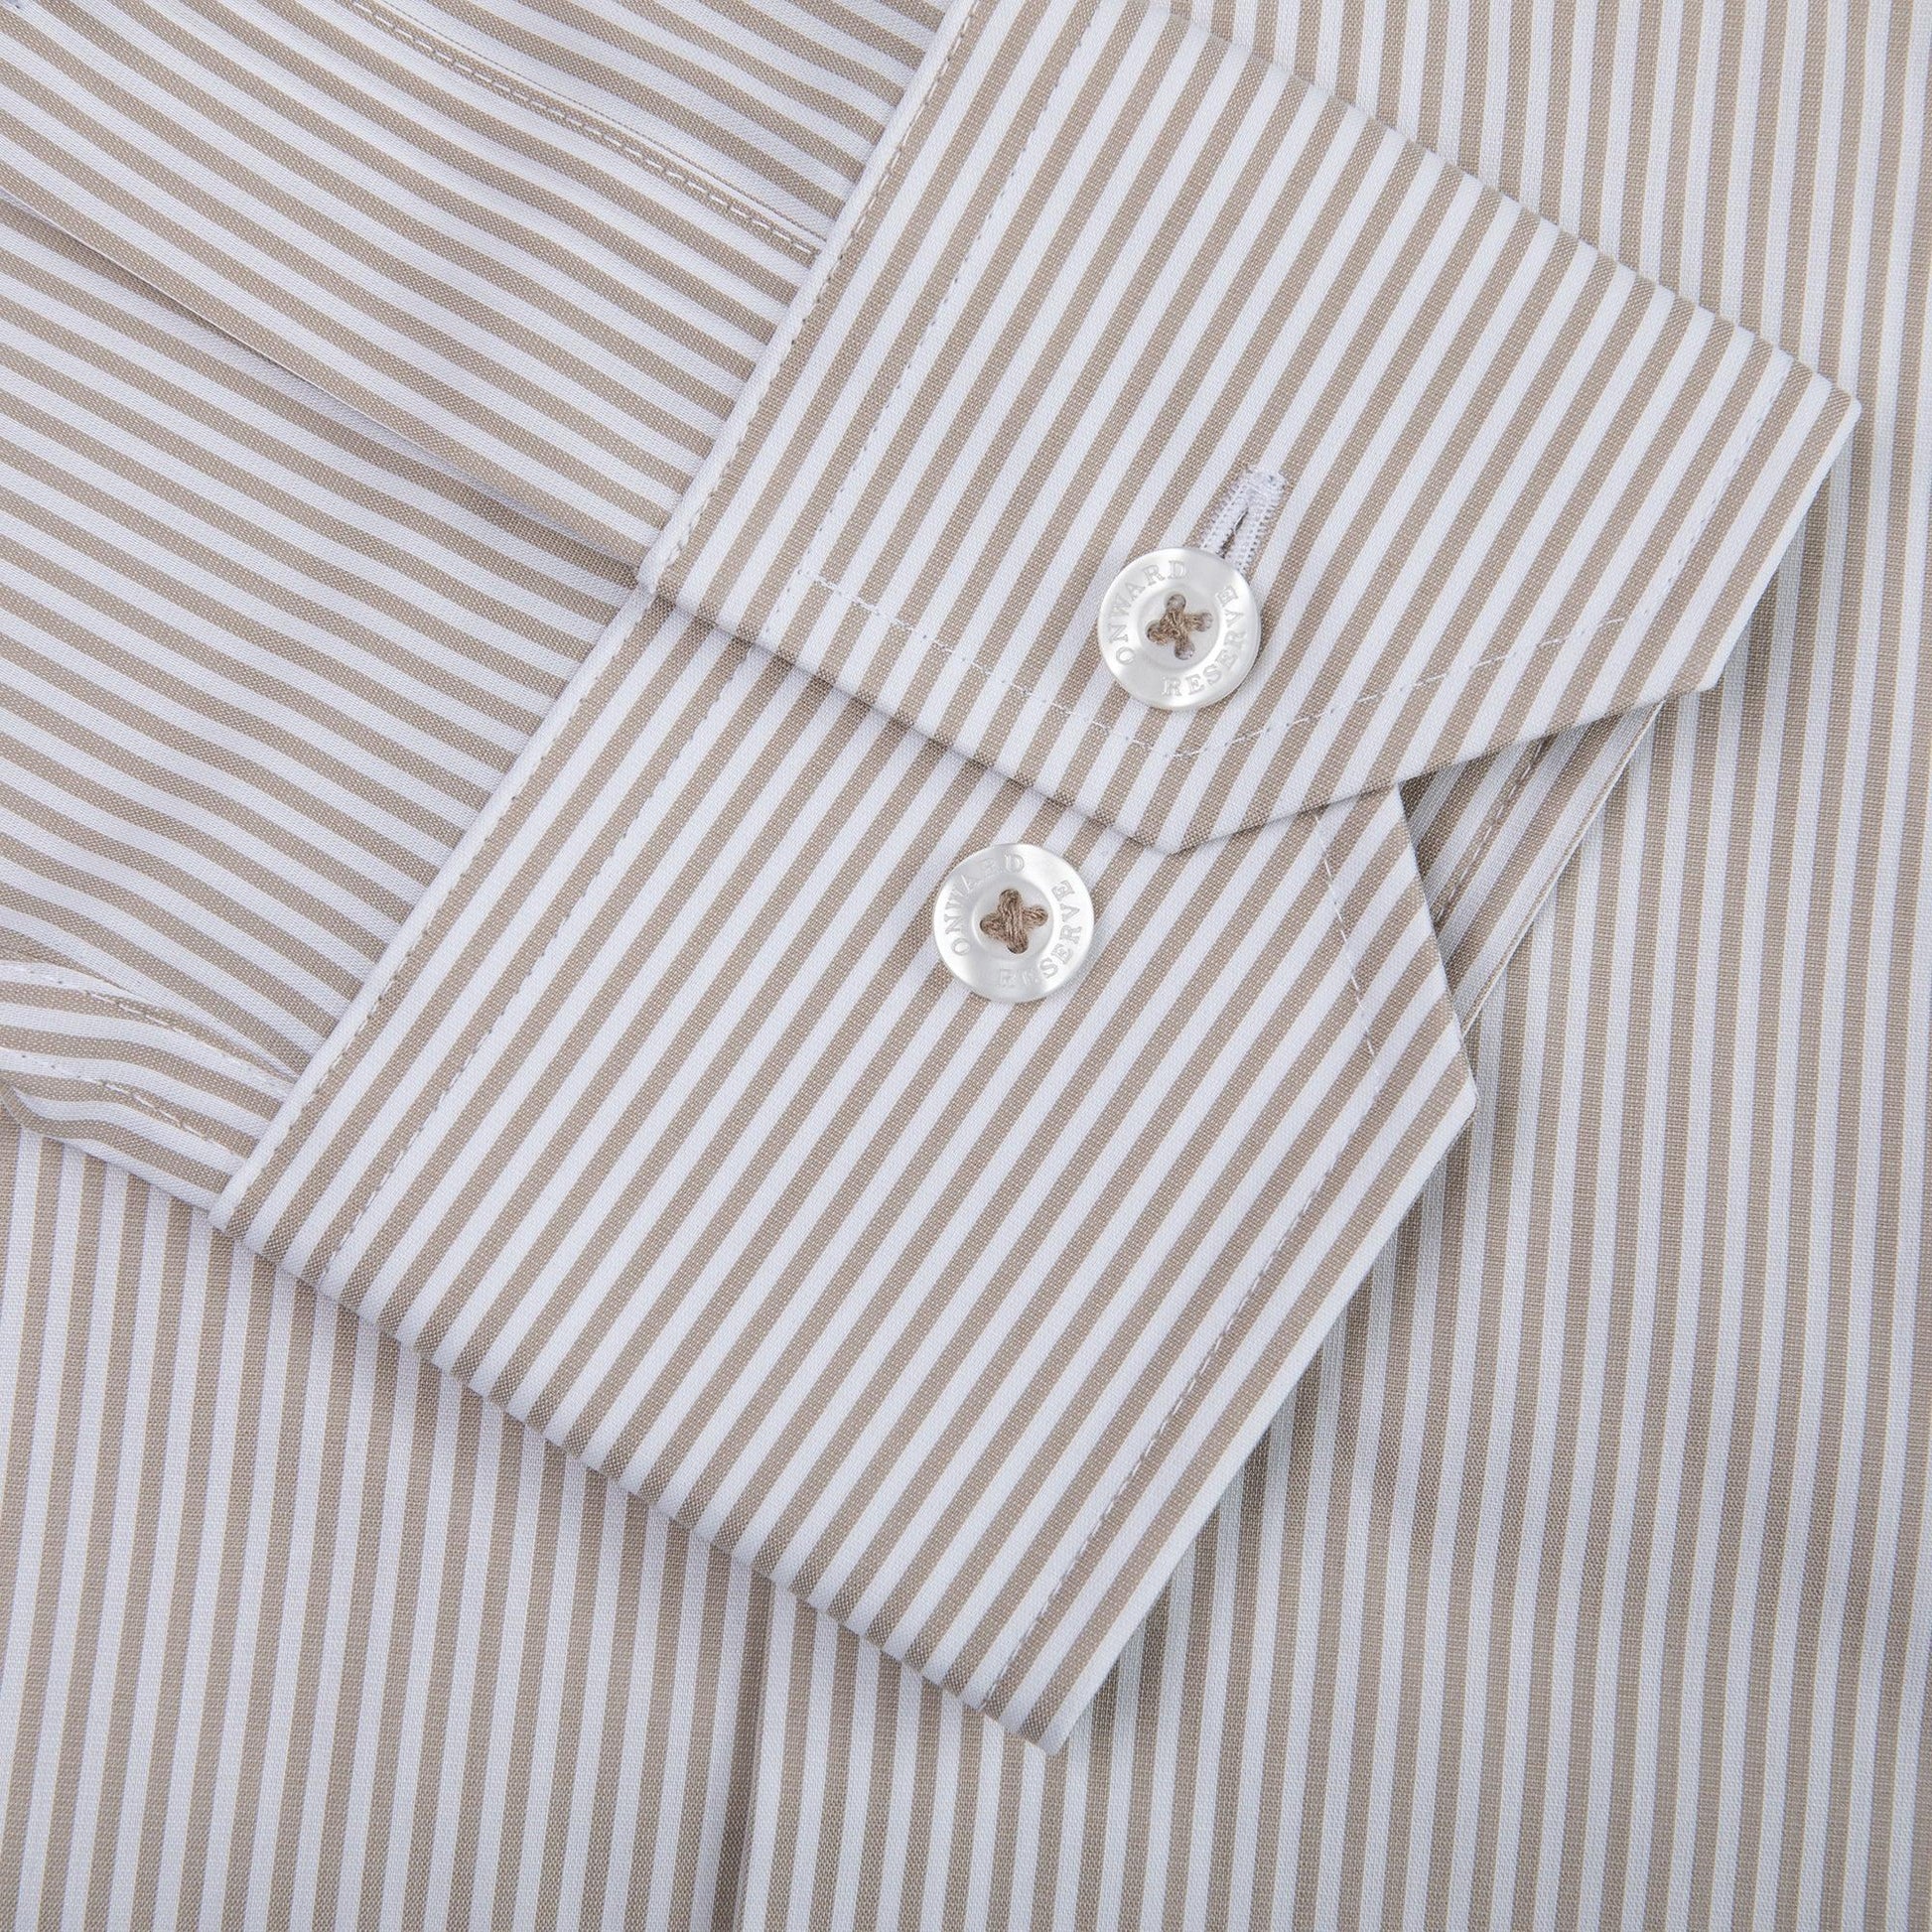 Dune/White Stripe Tailored Fit Spread Collar Shirt - Onward Reserve